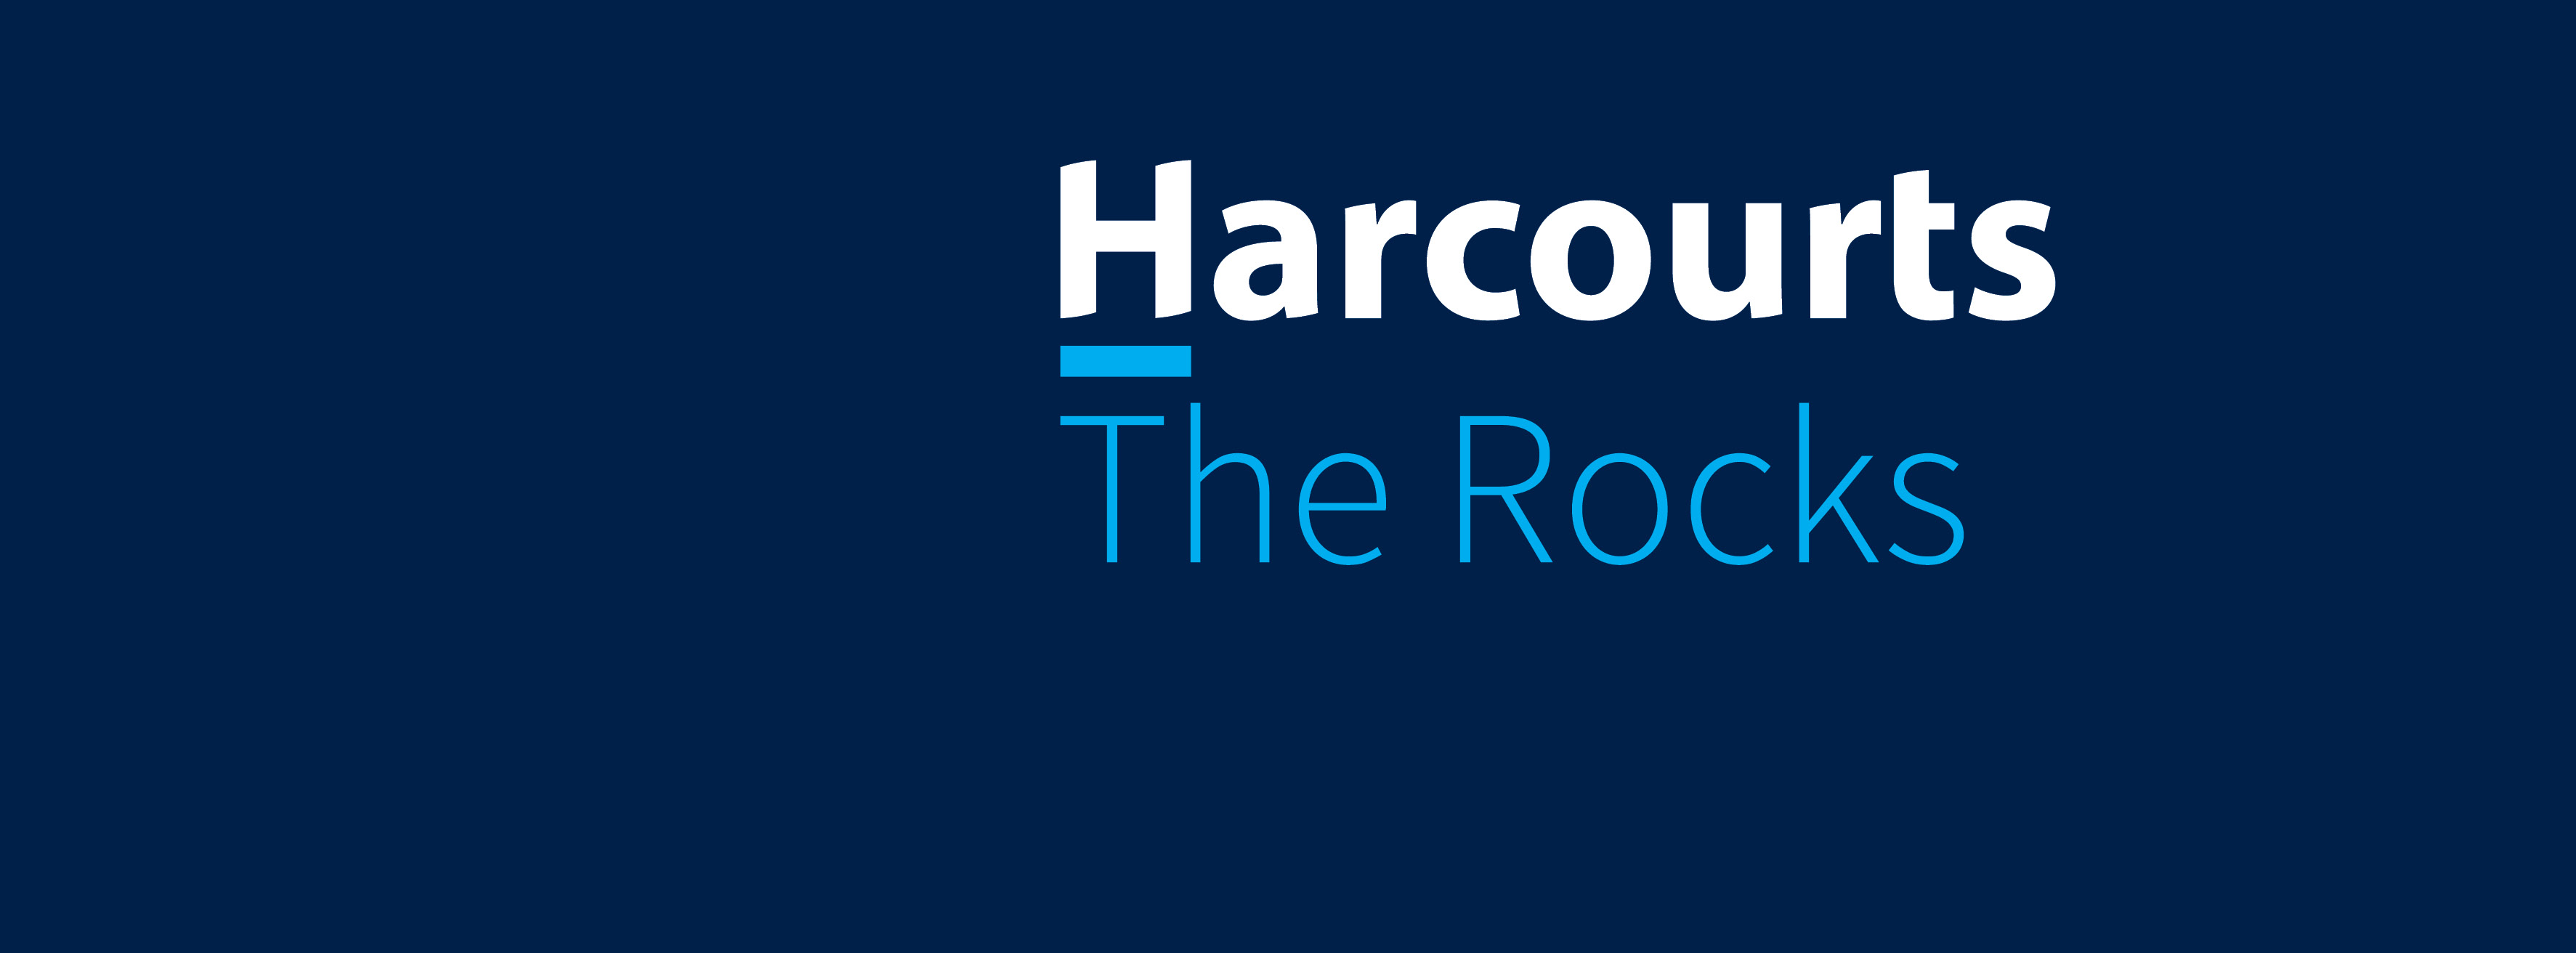 Harcourts The Rocks